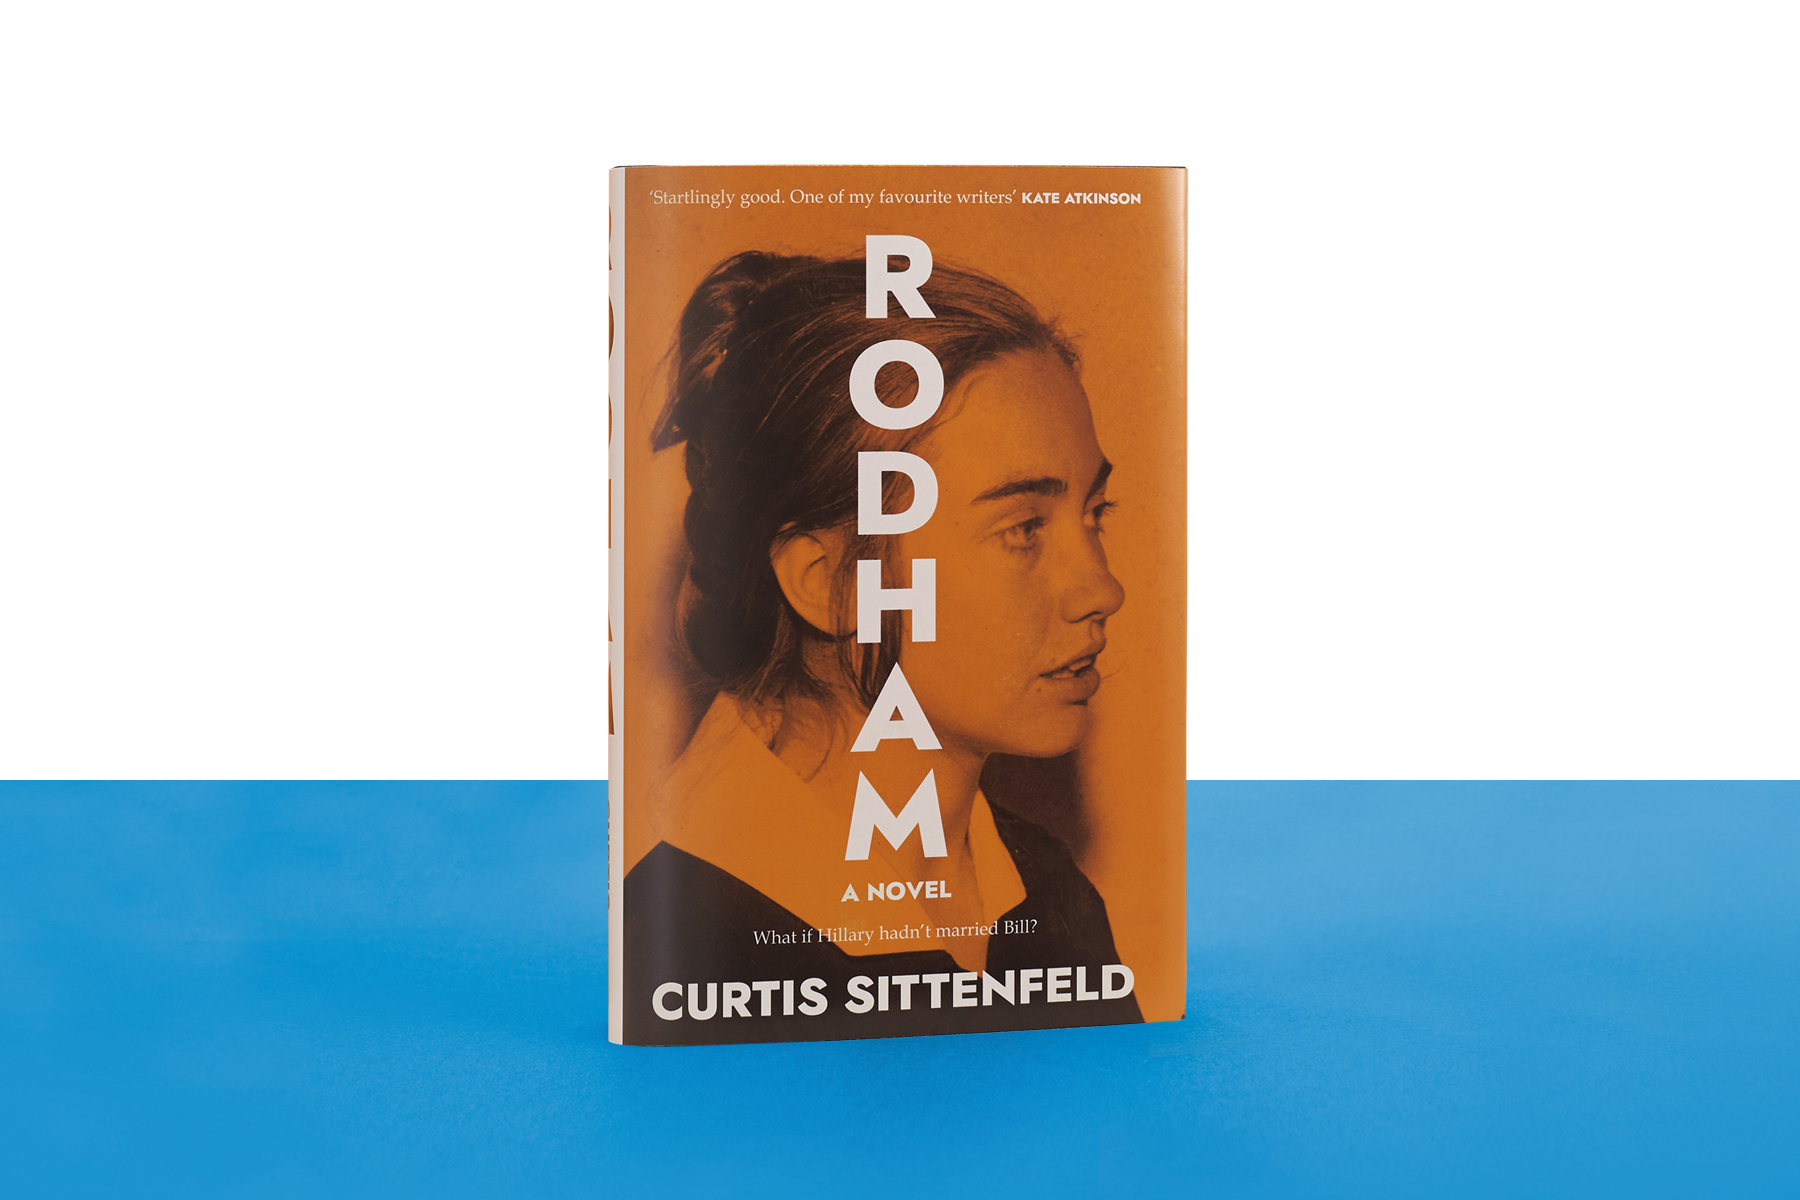 Curtis Sittenfeld's Rodham will be the topic of conversation in an event with Hadley Freeman